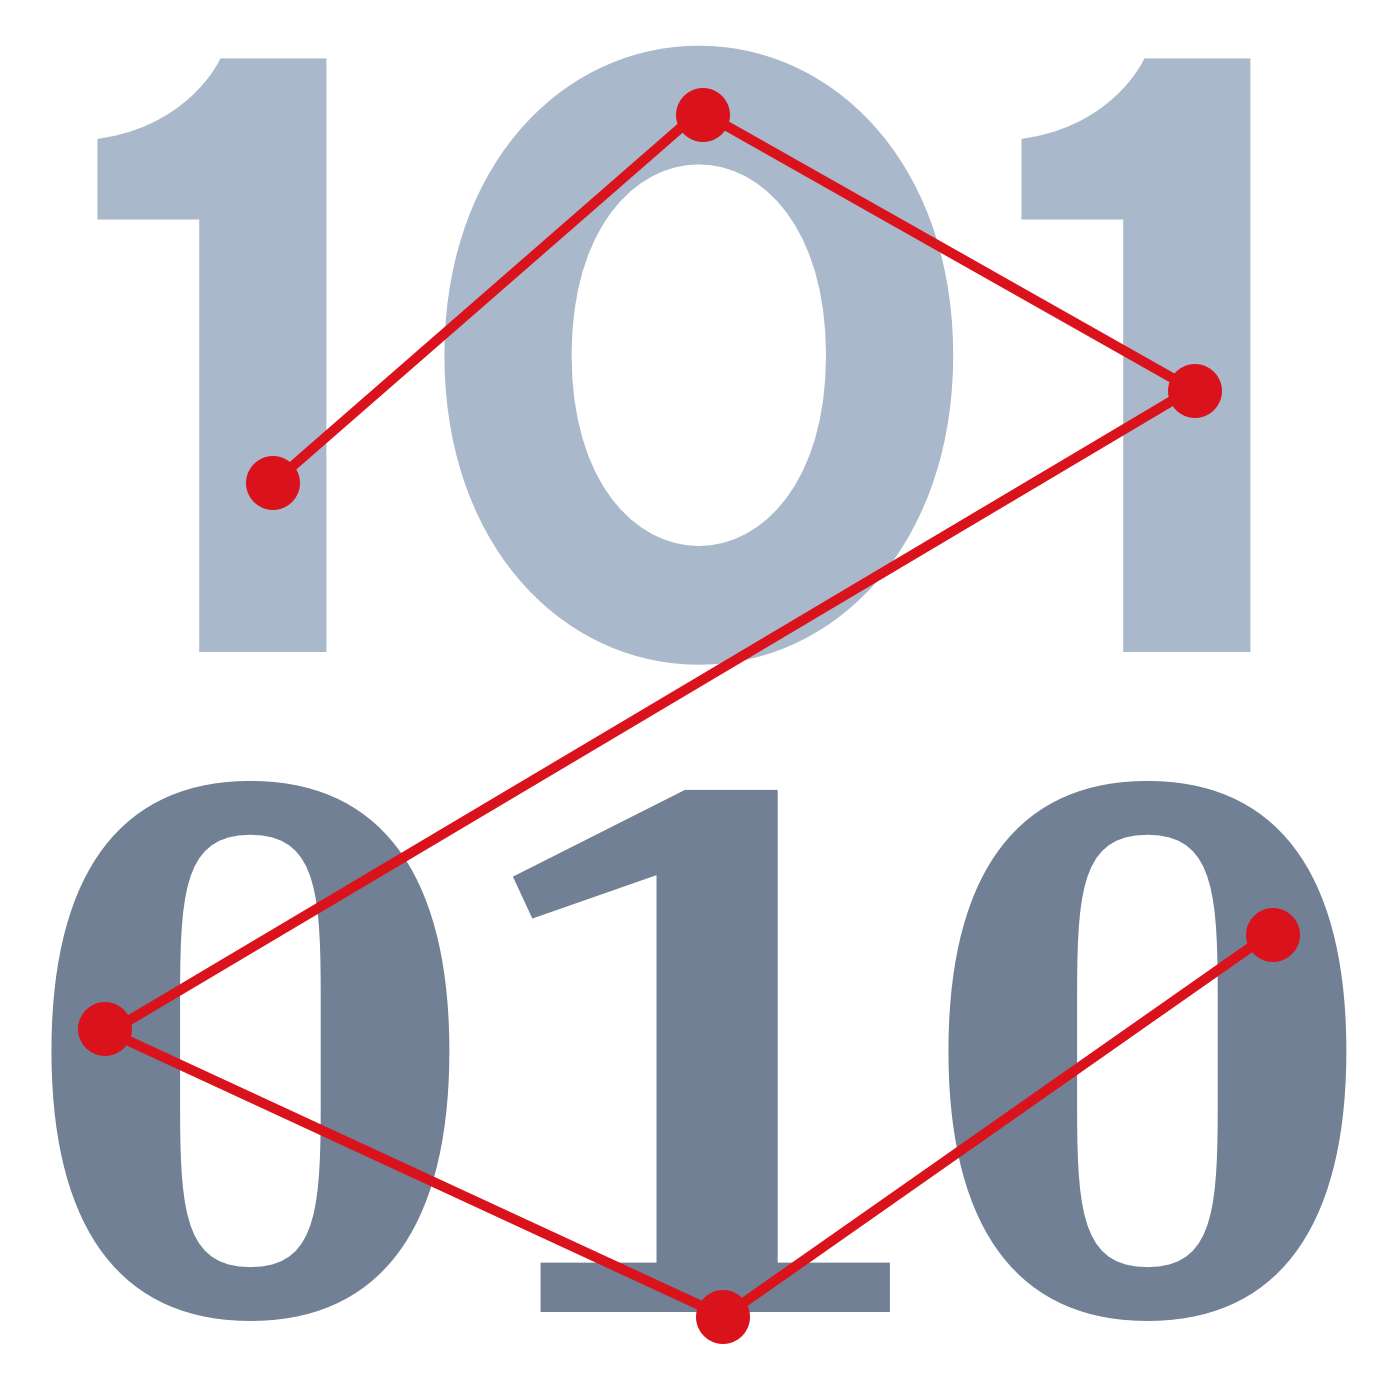 Numbers101 and 010 connected by a thin dotted line